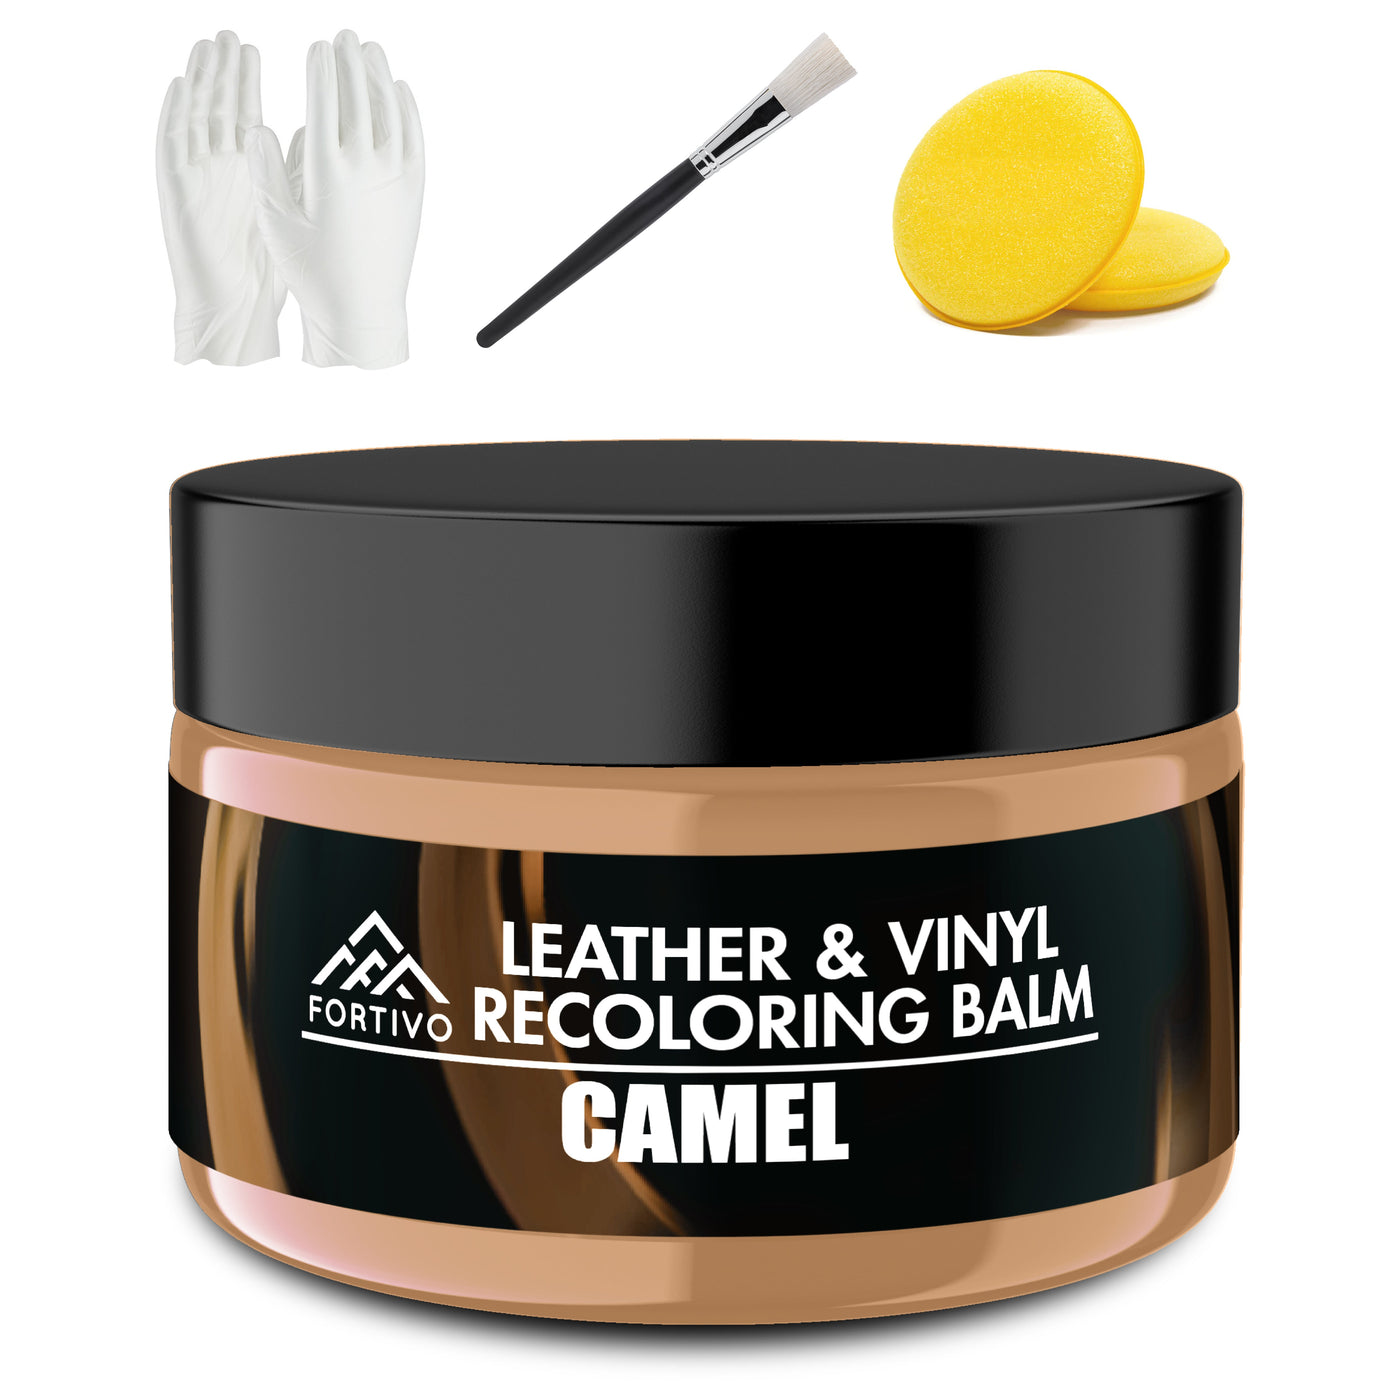 BSCPAM Leather Recoloring Balm - Leather Repair Kit for Furniture & Vinyl-  Leather Dye, Restore & Renew for Couches, Car Seats, Belt, Boots - Non